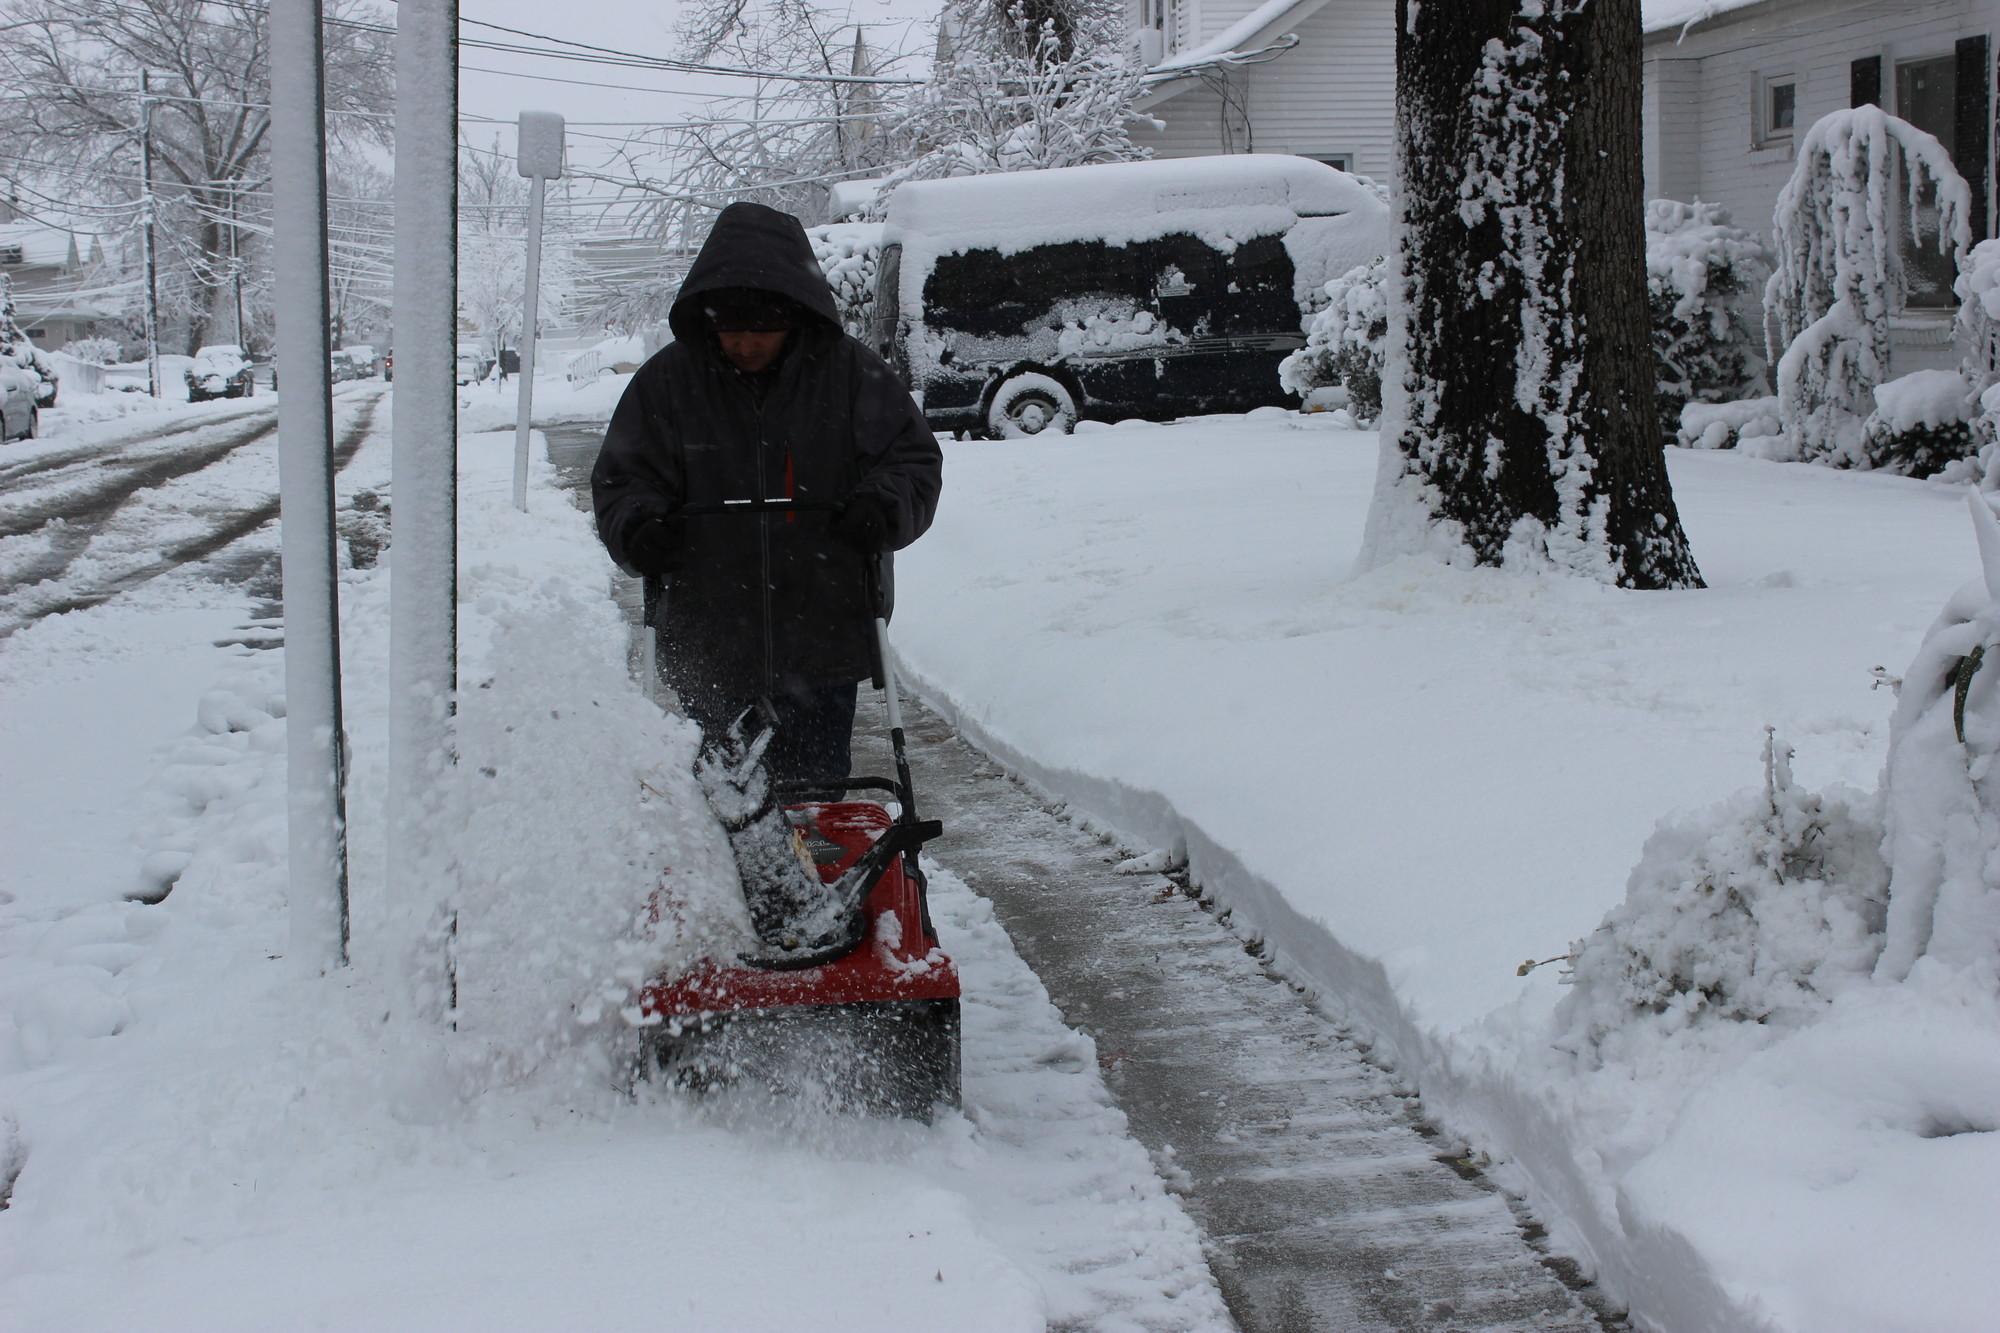 Nettaly Onque was hard at work with his snowblower on East Fairview Avenue.